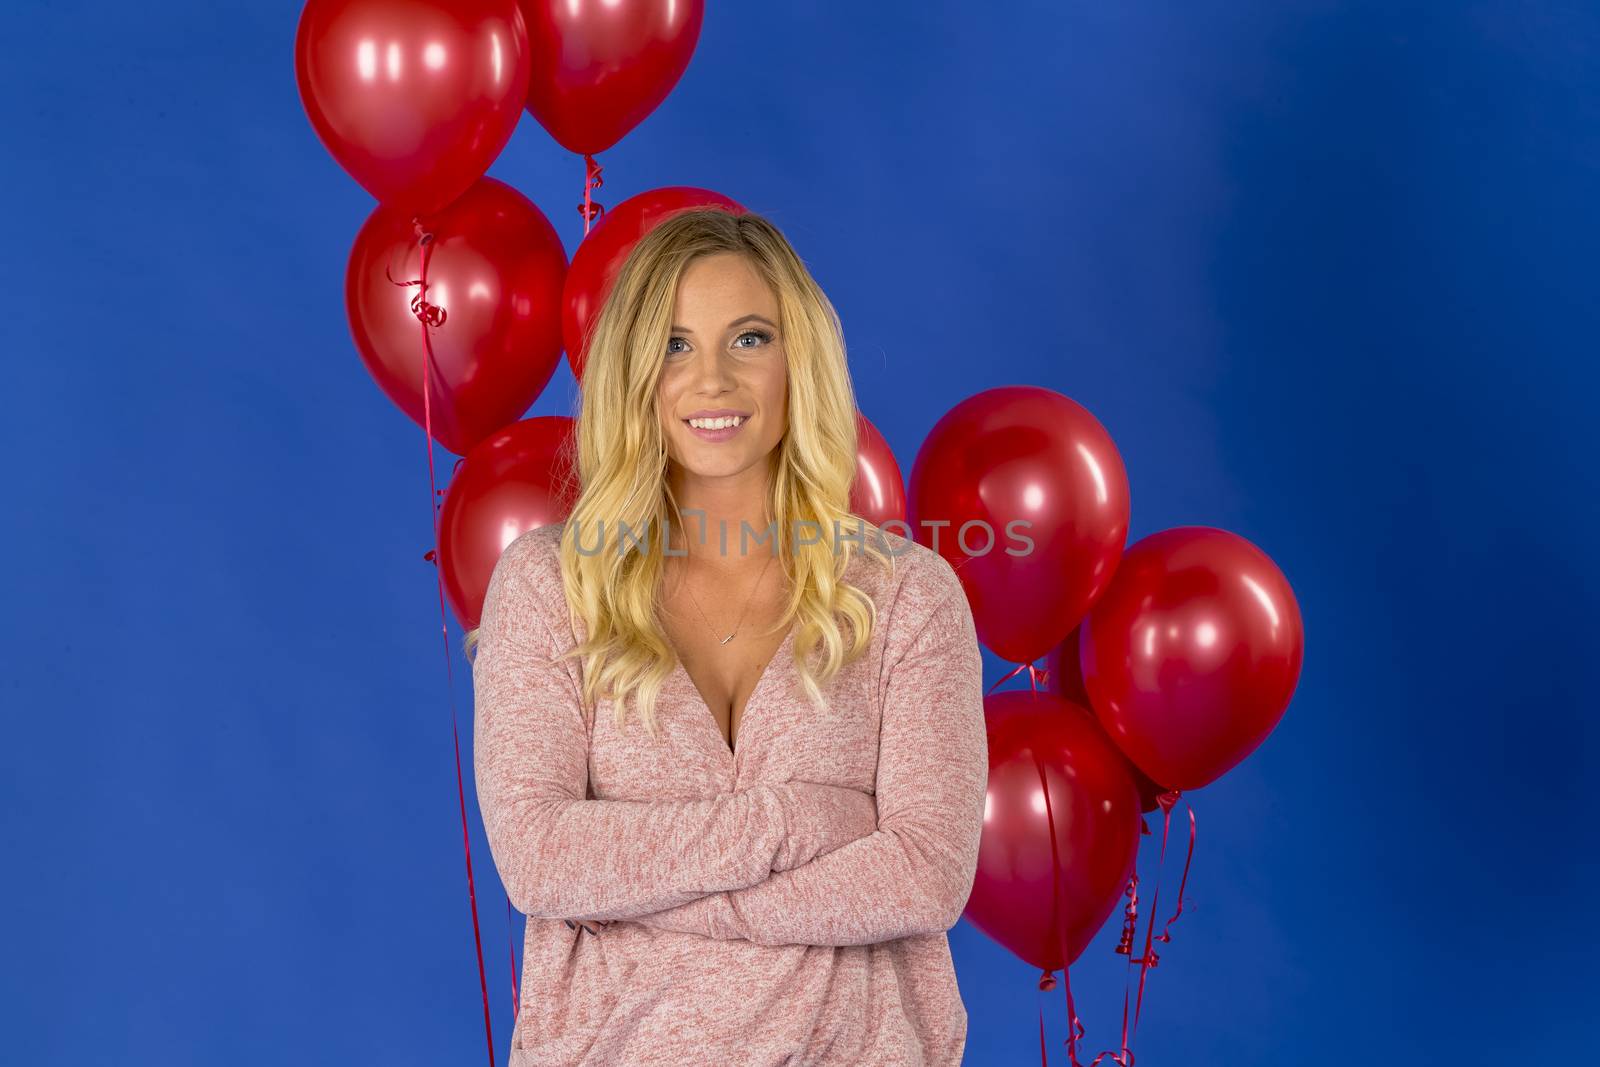 A beautiful blonde model posing against red balloons in front of the camera in a studio environment